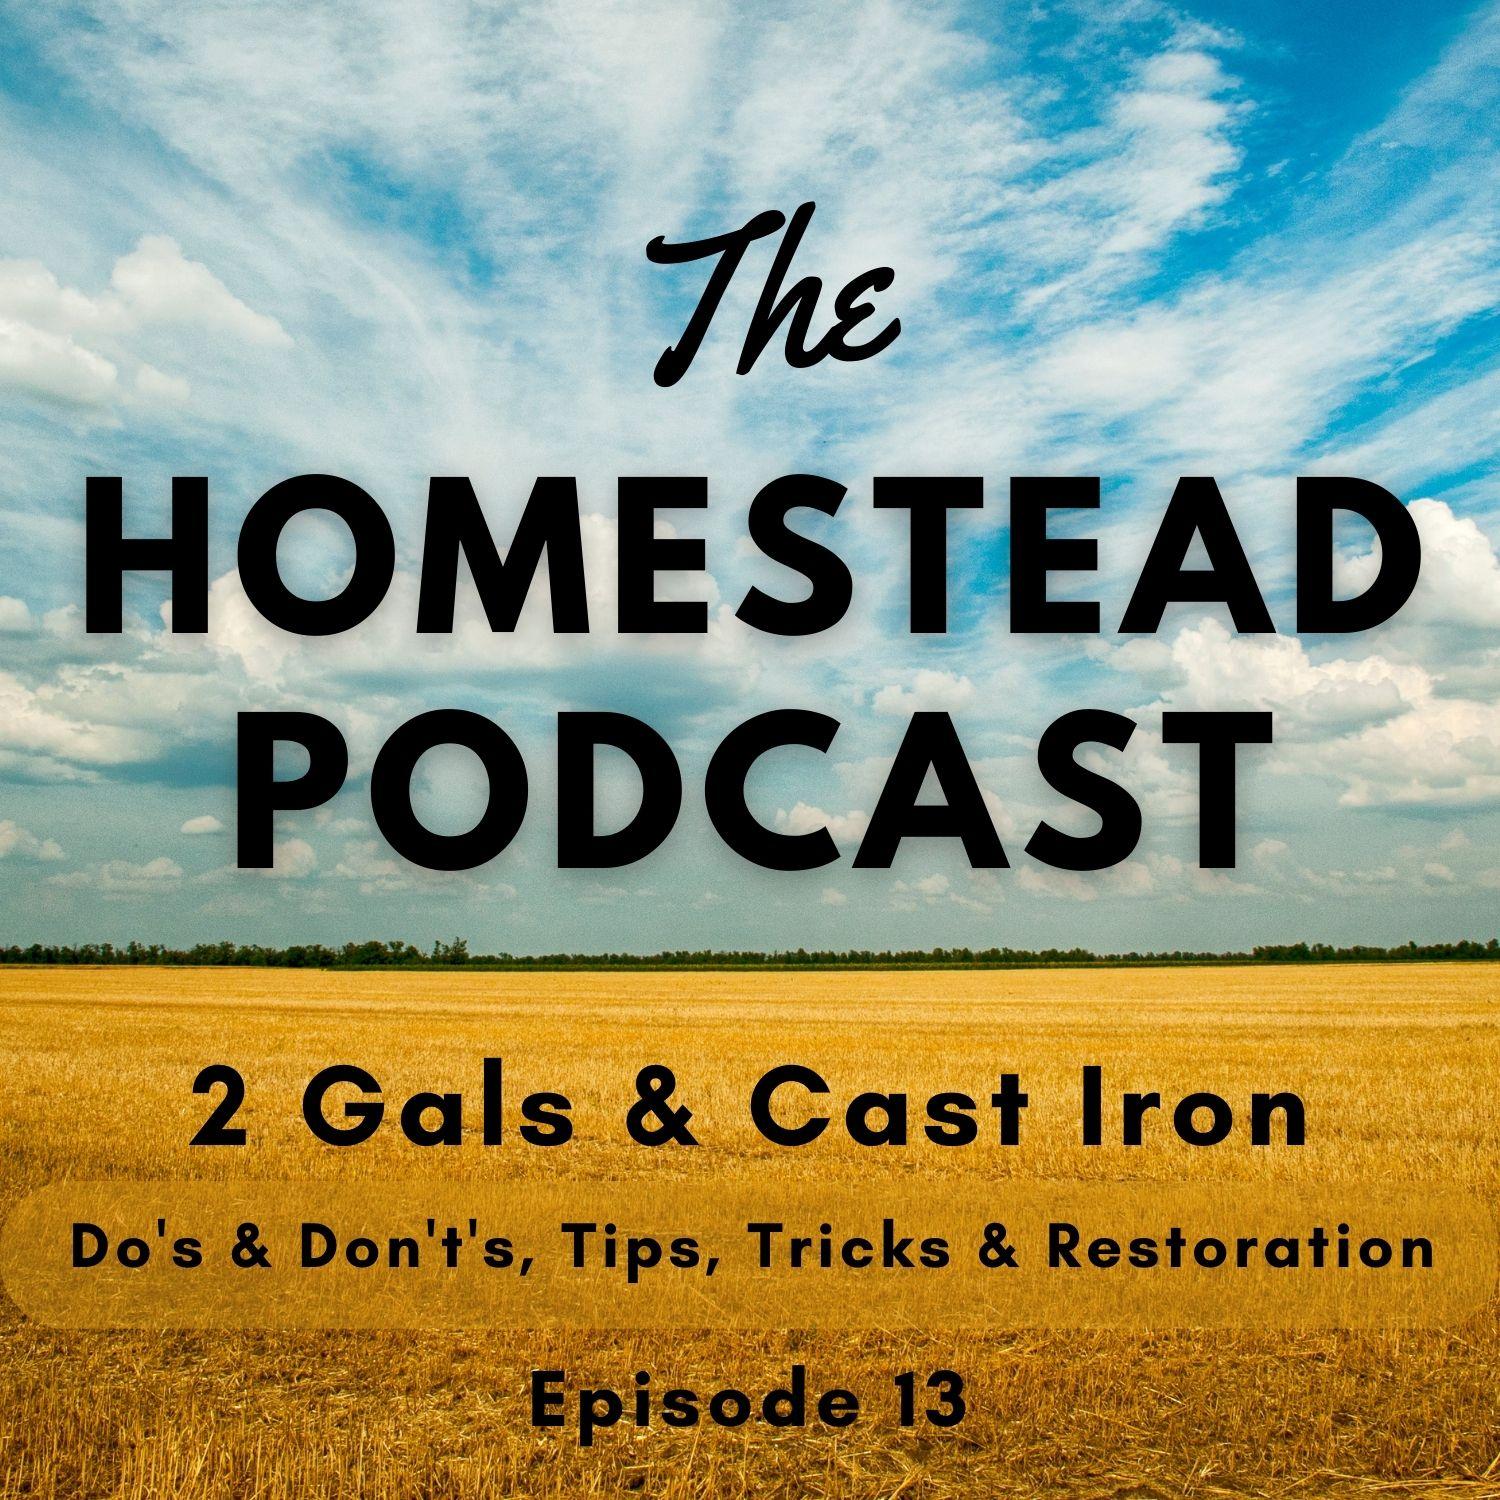 Ep. 13 - Do's & Don't's, Tips, Tricks & Restoration of Cast Iron Cookware - 2 Gals & Cast Iron